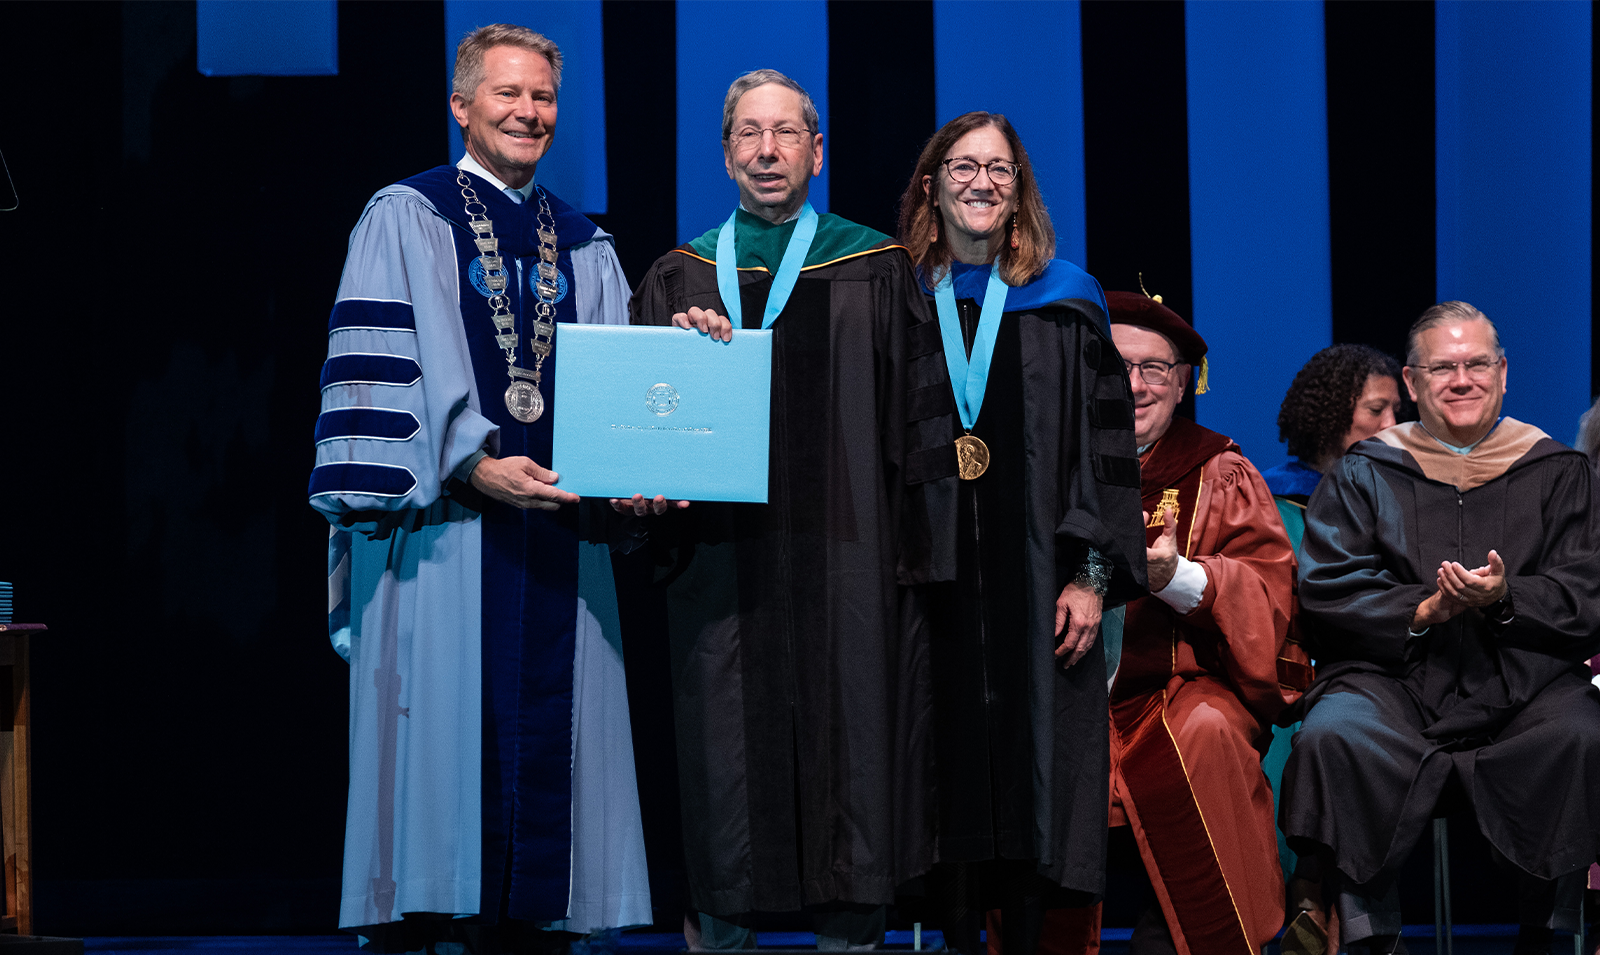 An award winner posing for photos on a stage with University leaders.